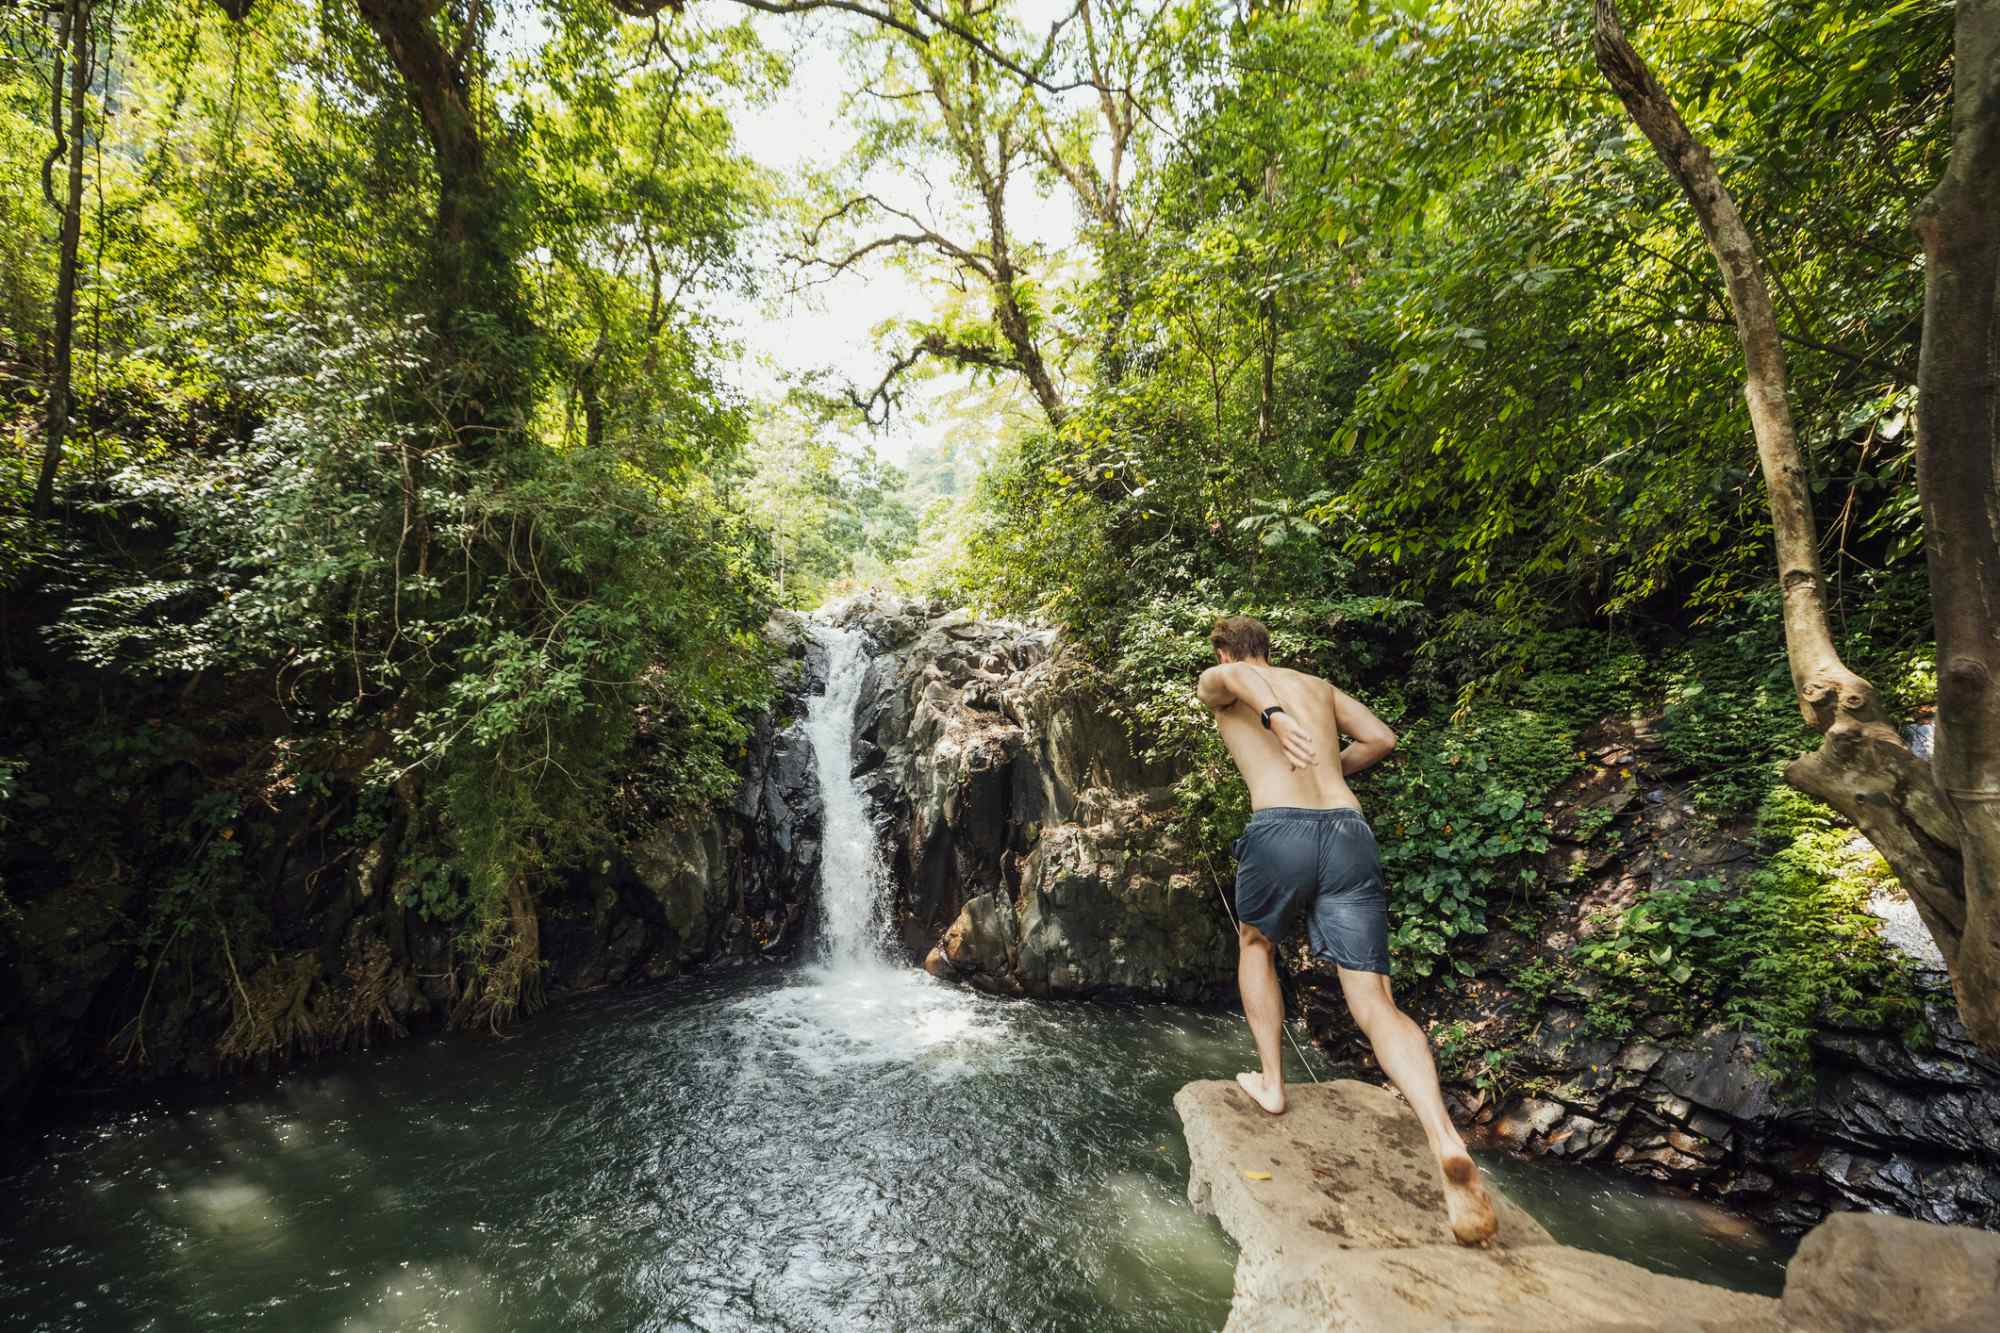 A rear view action shot of a young man taking a running leap off a cliff next to a waterfall in Bali.
